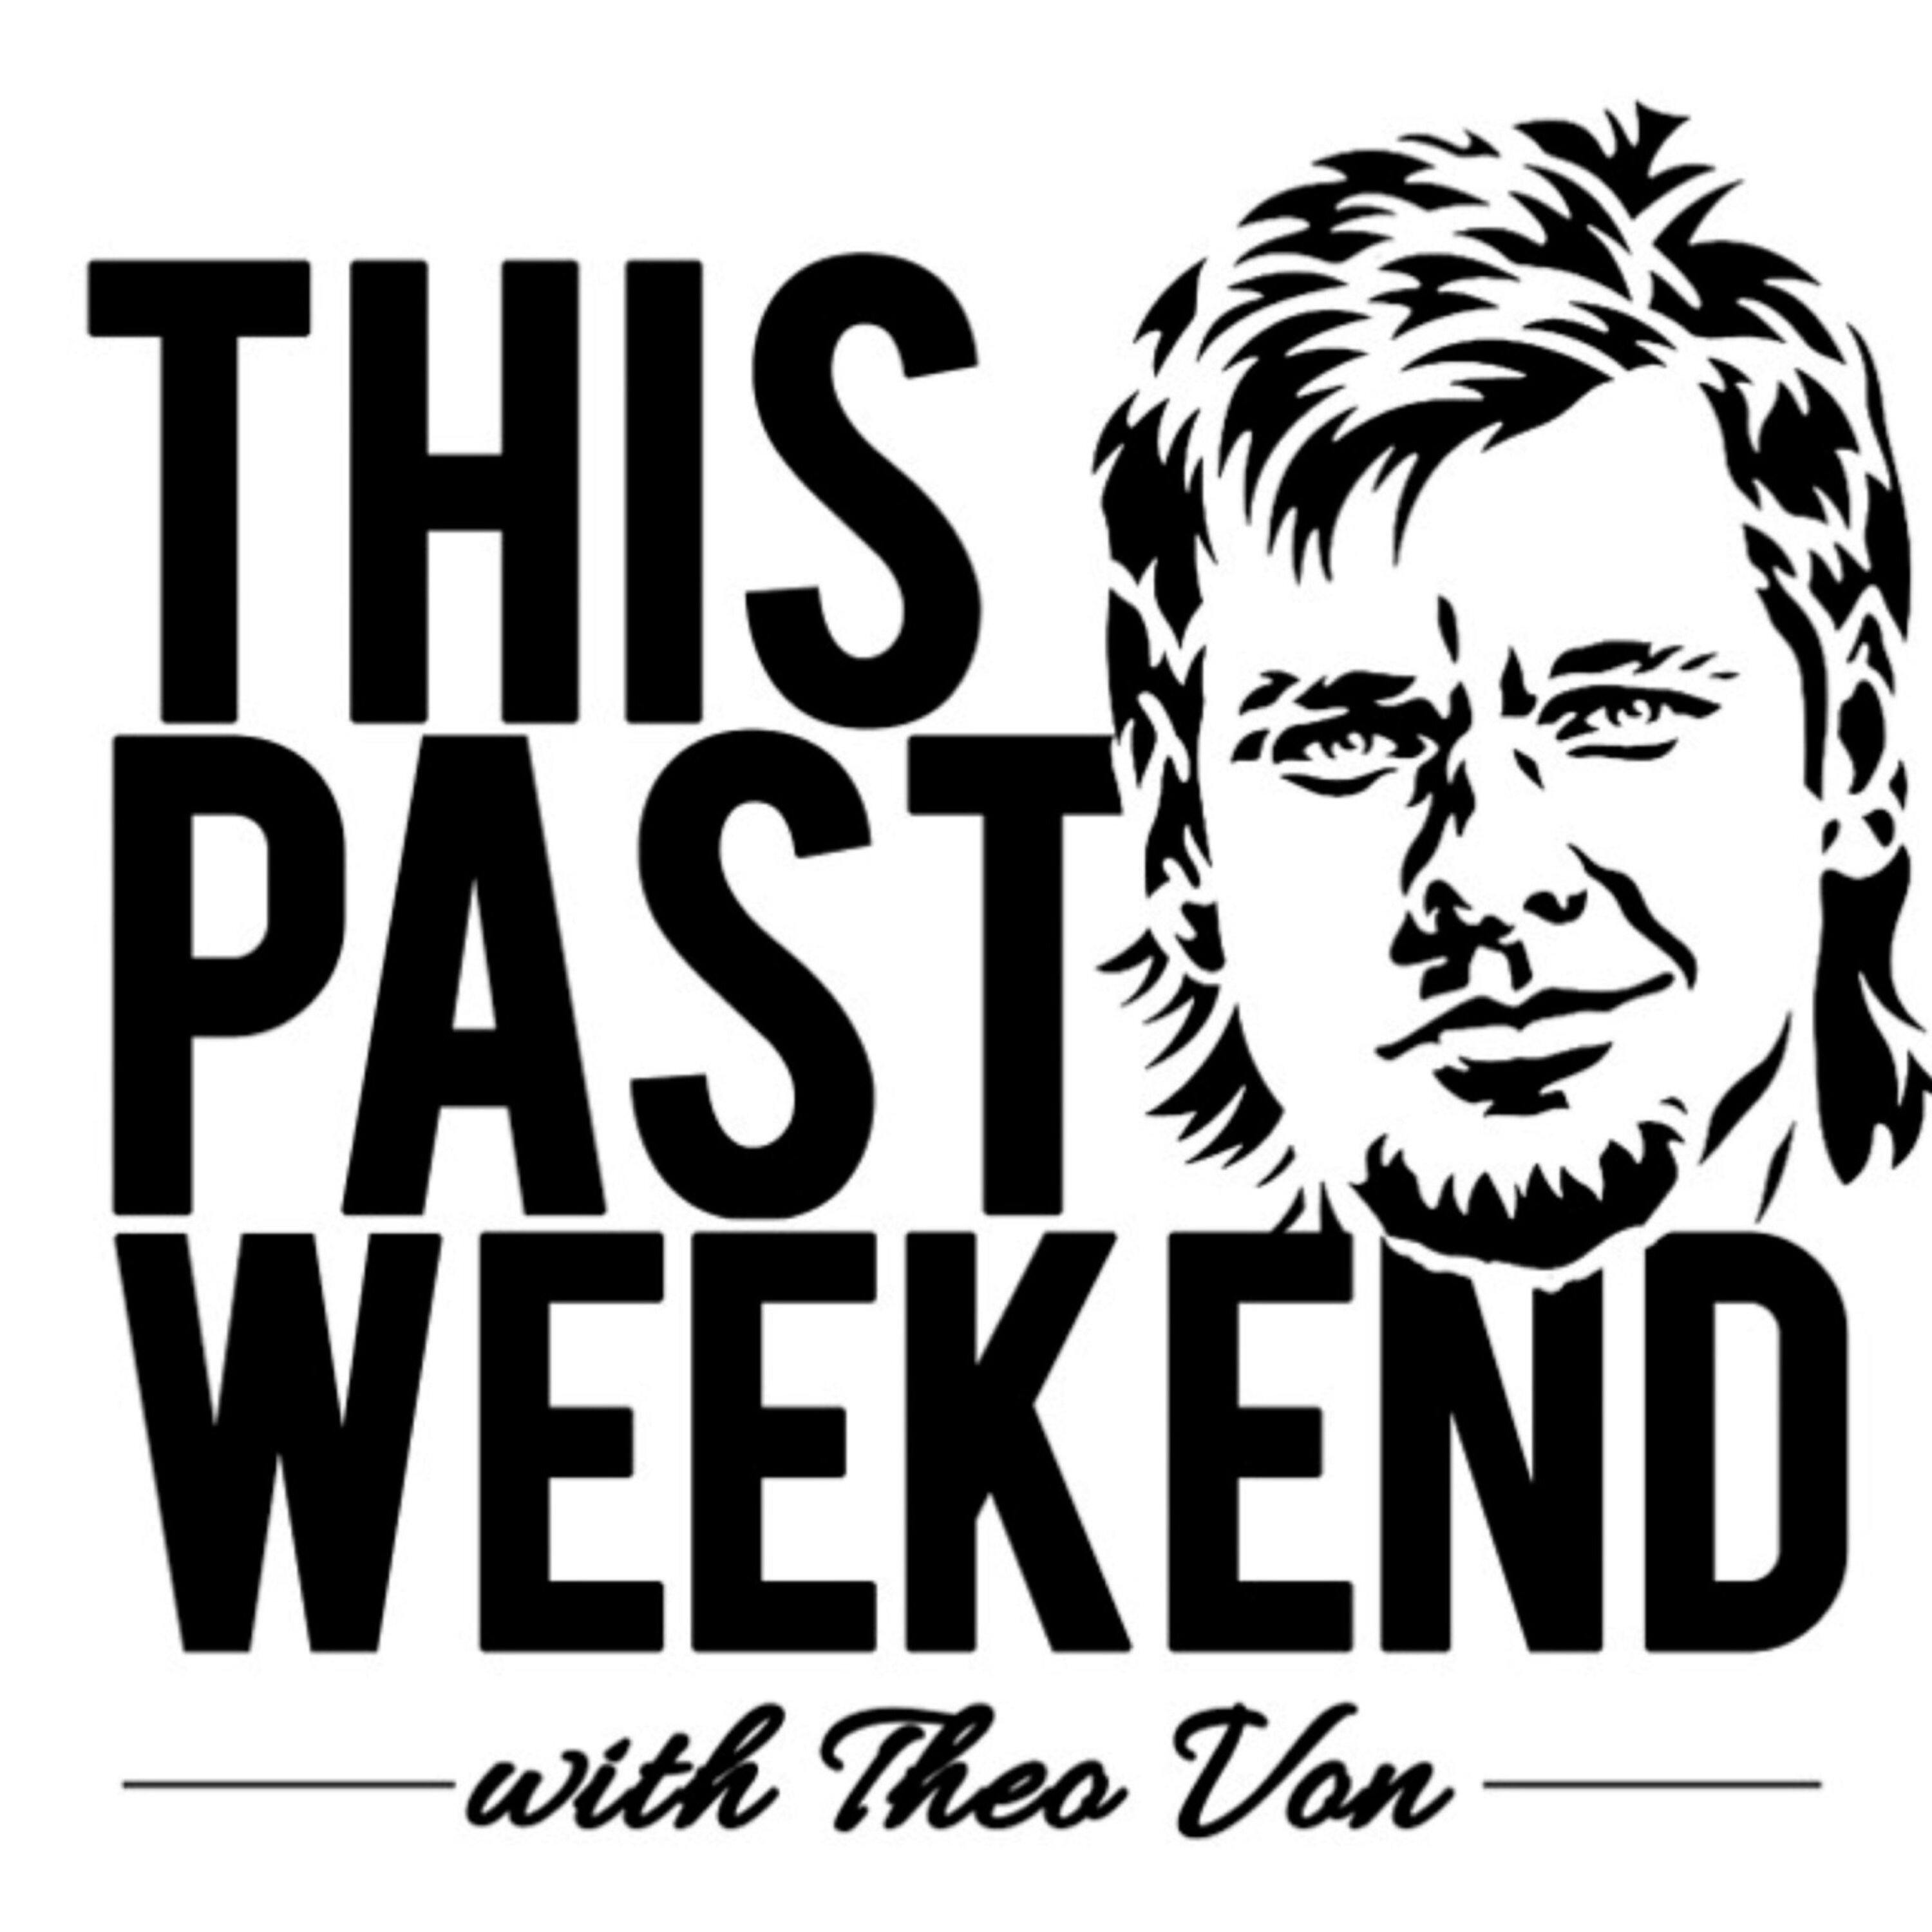 Easter Feaster: This Past Weekend #85 by Theo Von